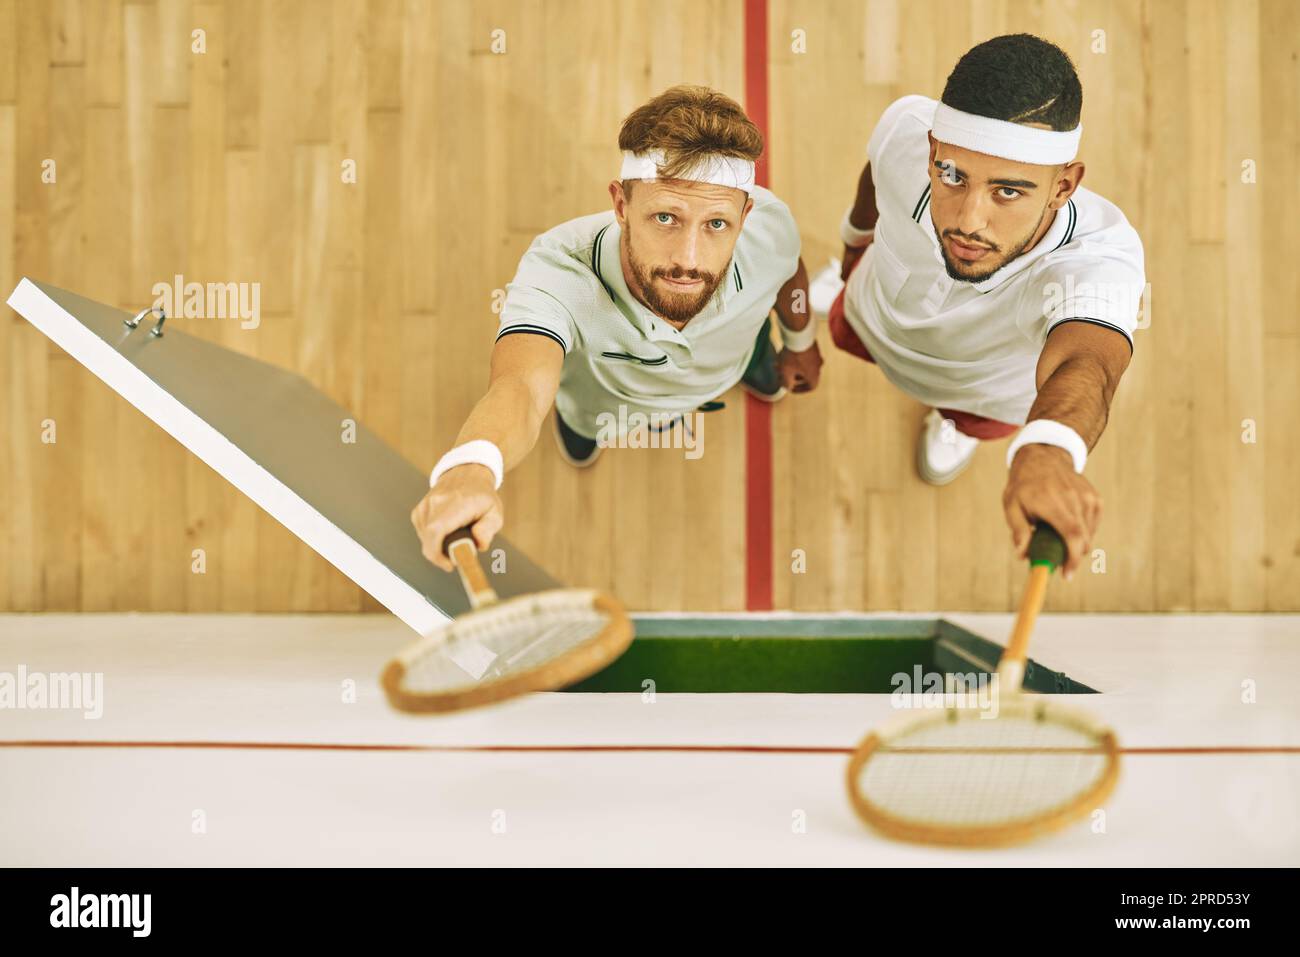 No matter the outcome carry yourself with confidence. High angle shot of two young men holding up their rackets at a squash court. Stock Photo